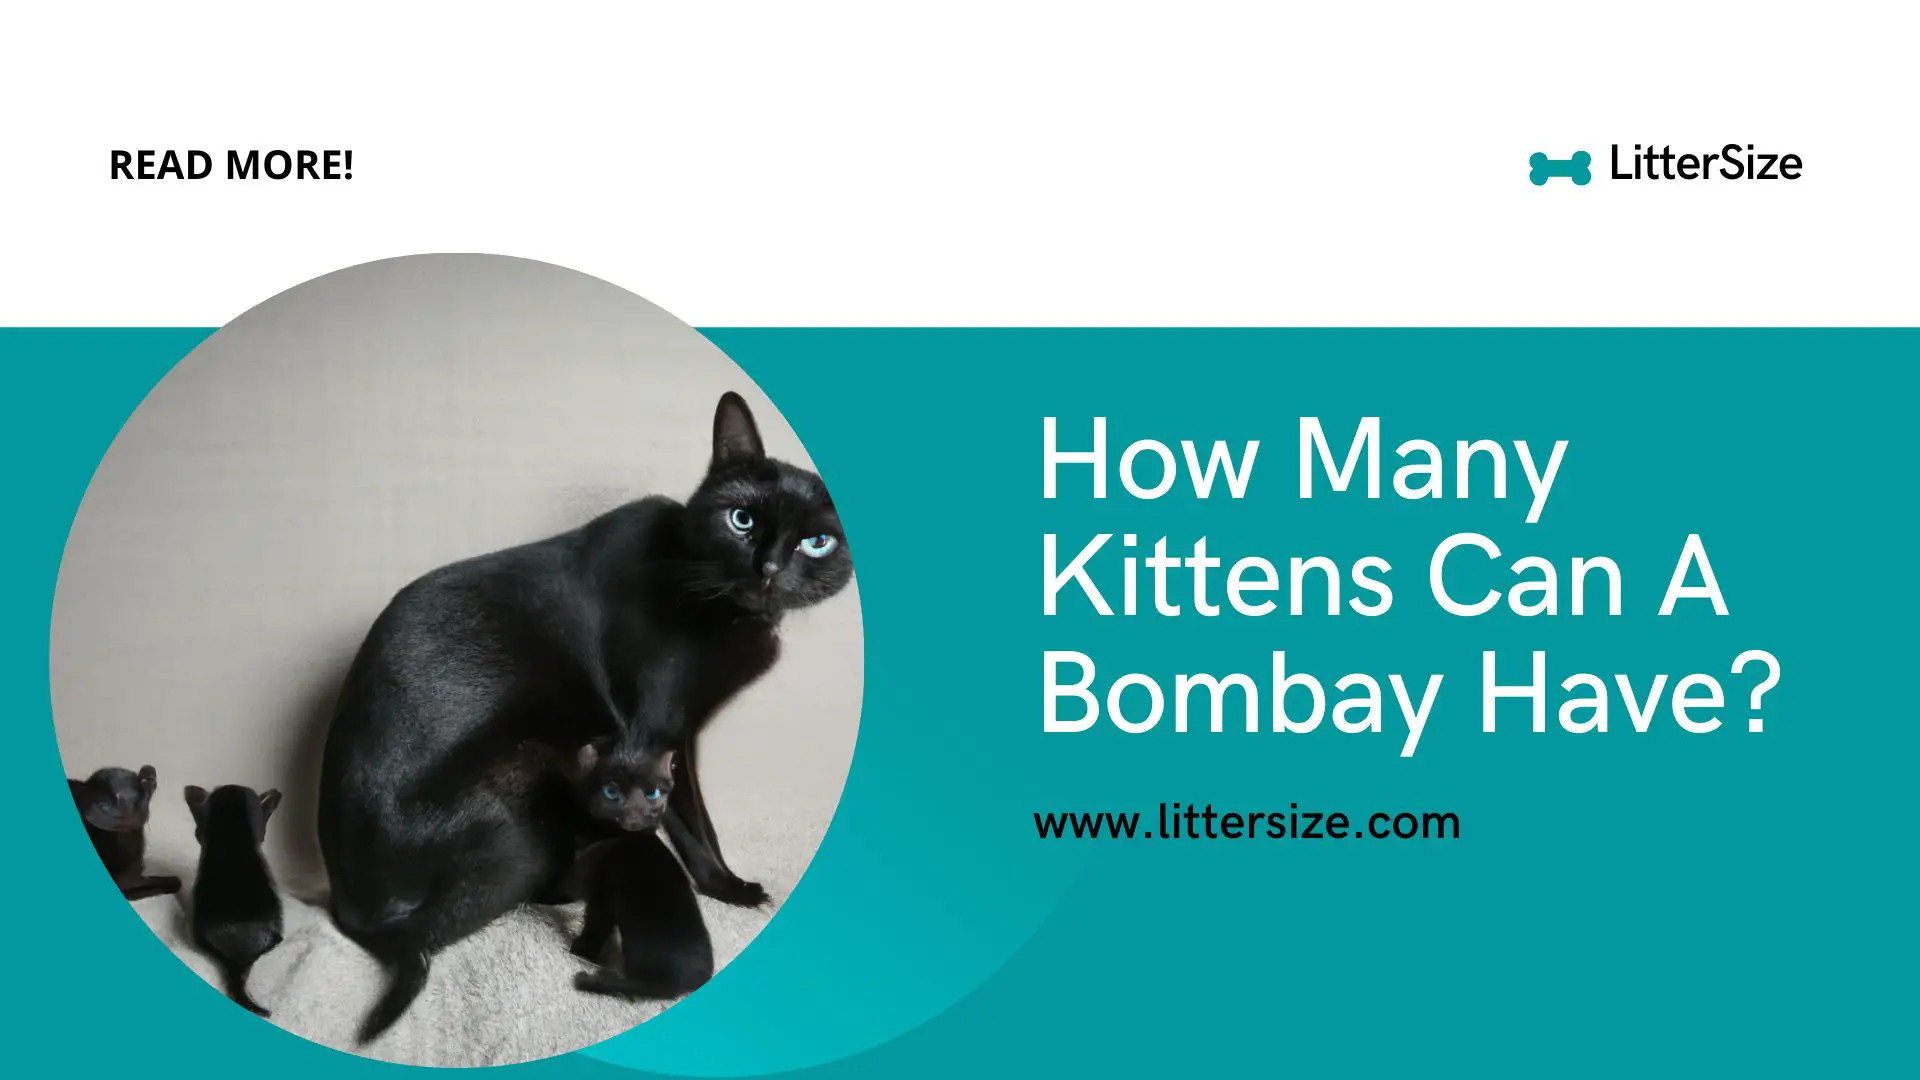 How Many Kittens Can A Bombay Have?